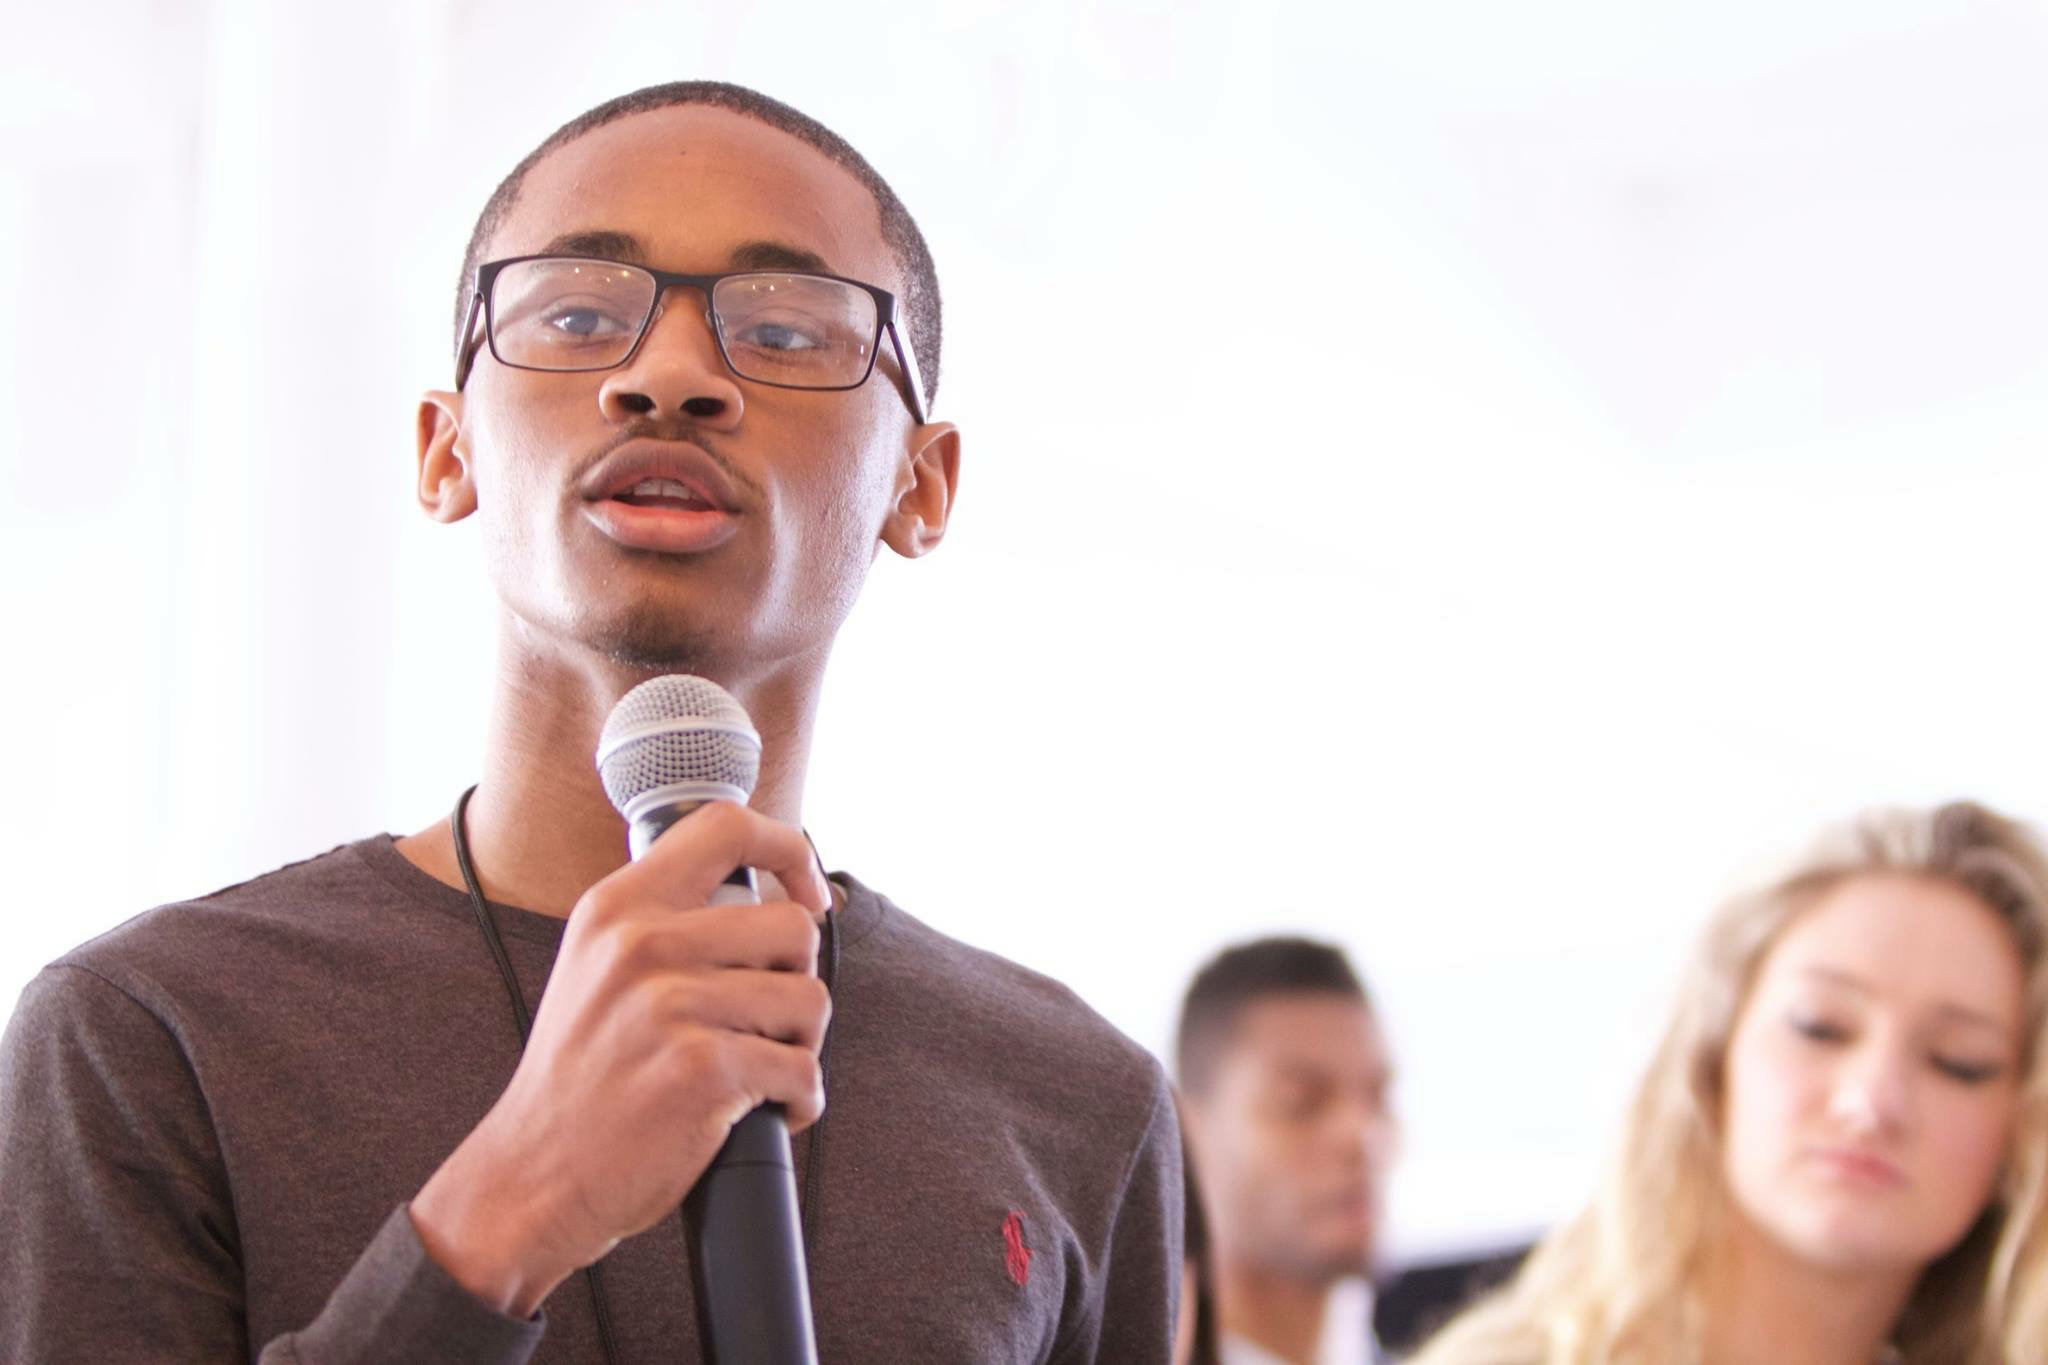 PHOTO: Chris Suggs, 15, speaks at the Global Teen Leaders/Three Dot Dash conference.